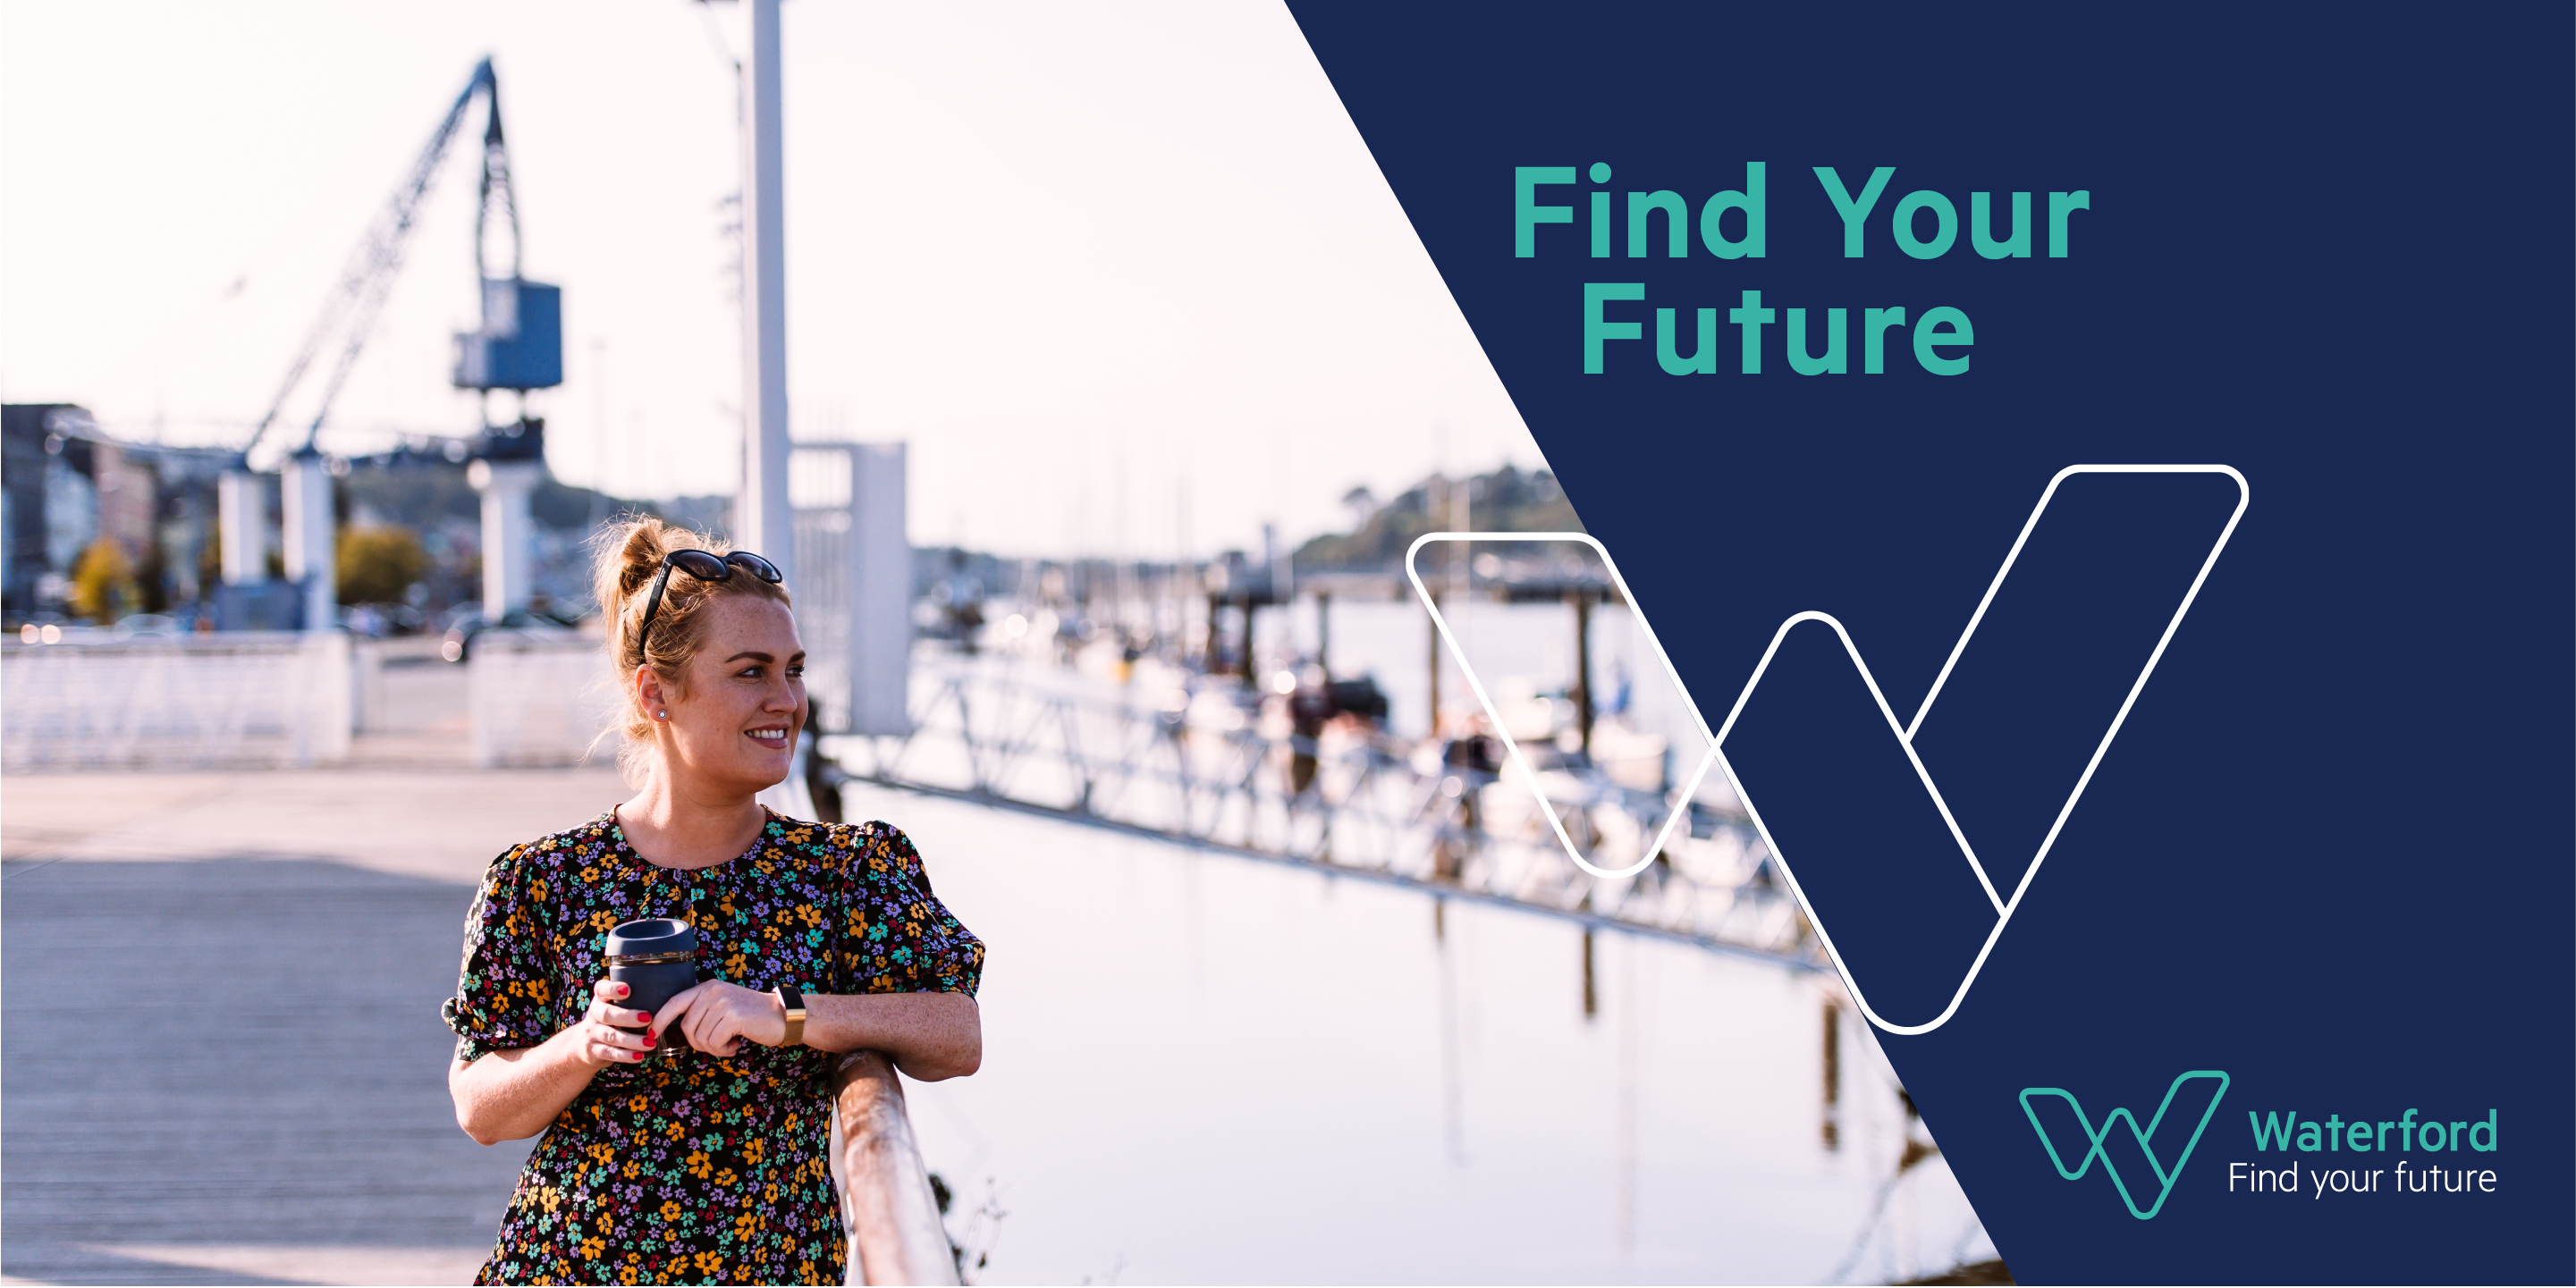 Waterford Find your future billboard